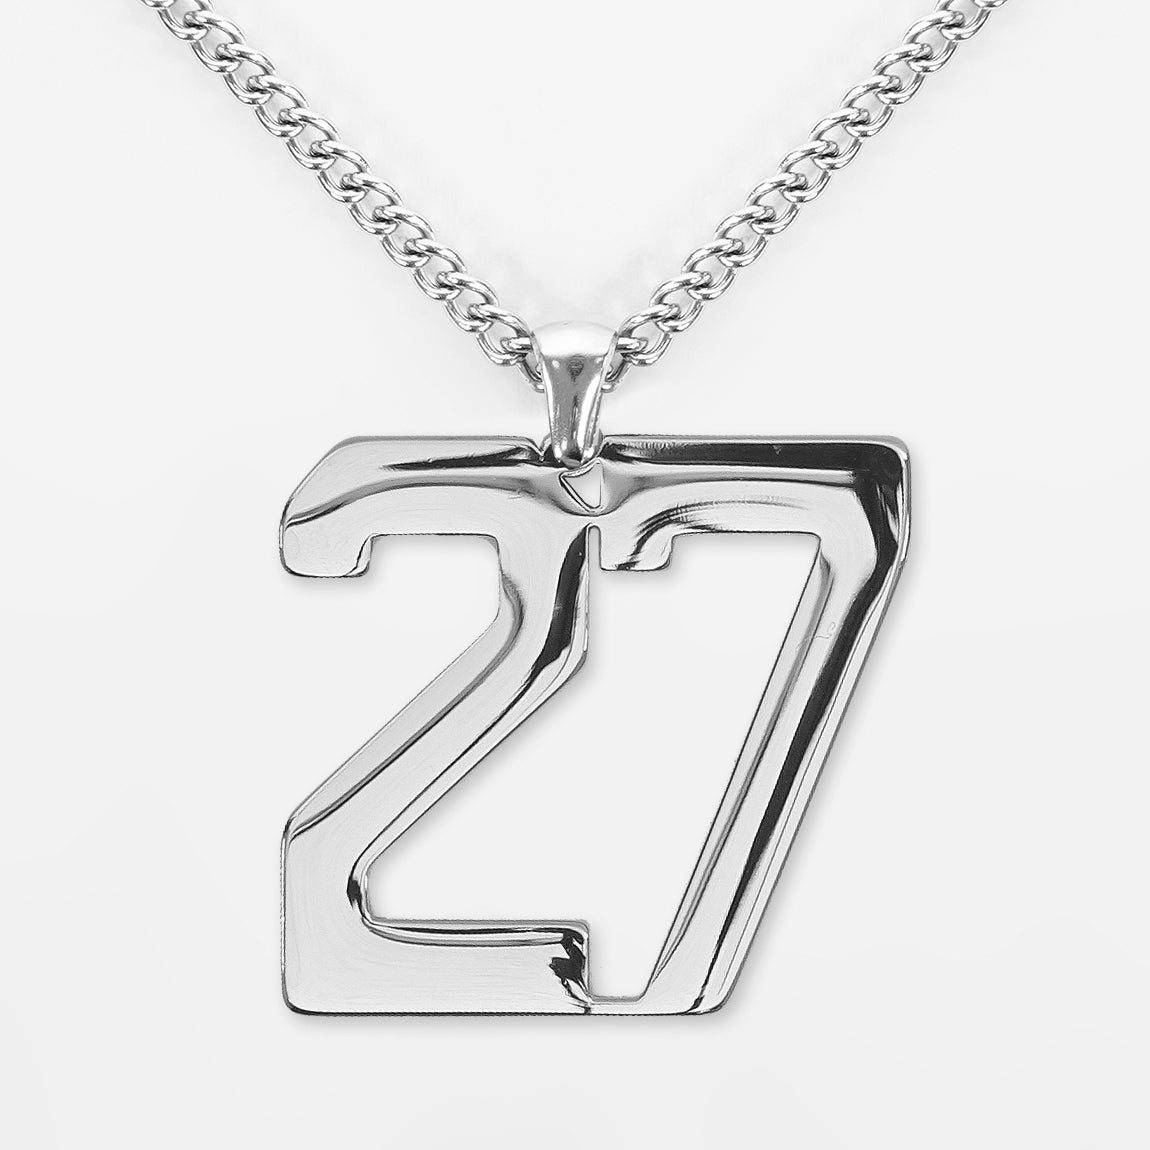 27 Number Pendant with Chain Necklace - Stainless Steel